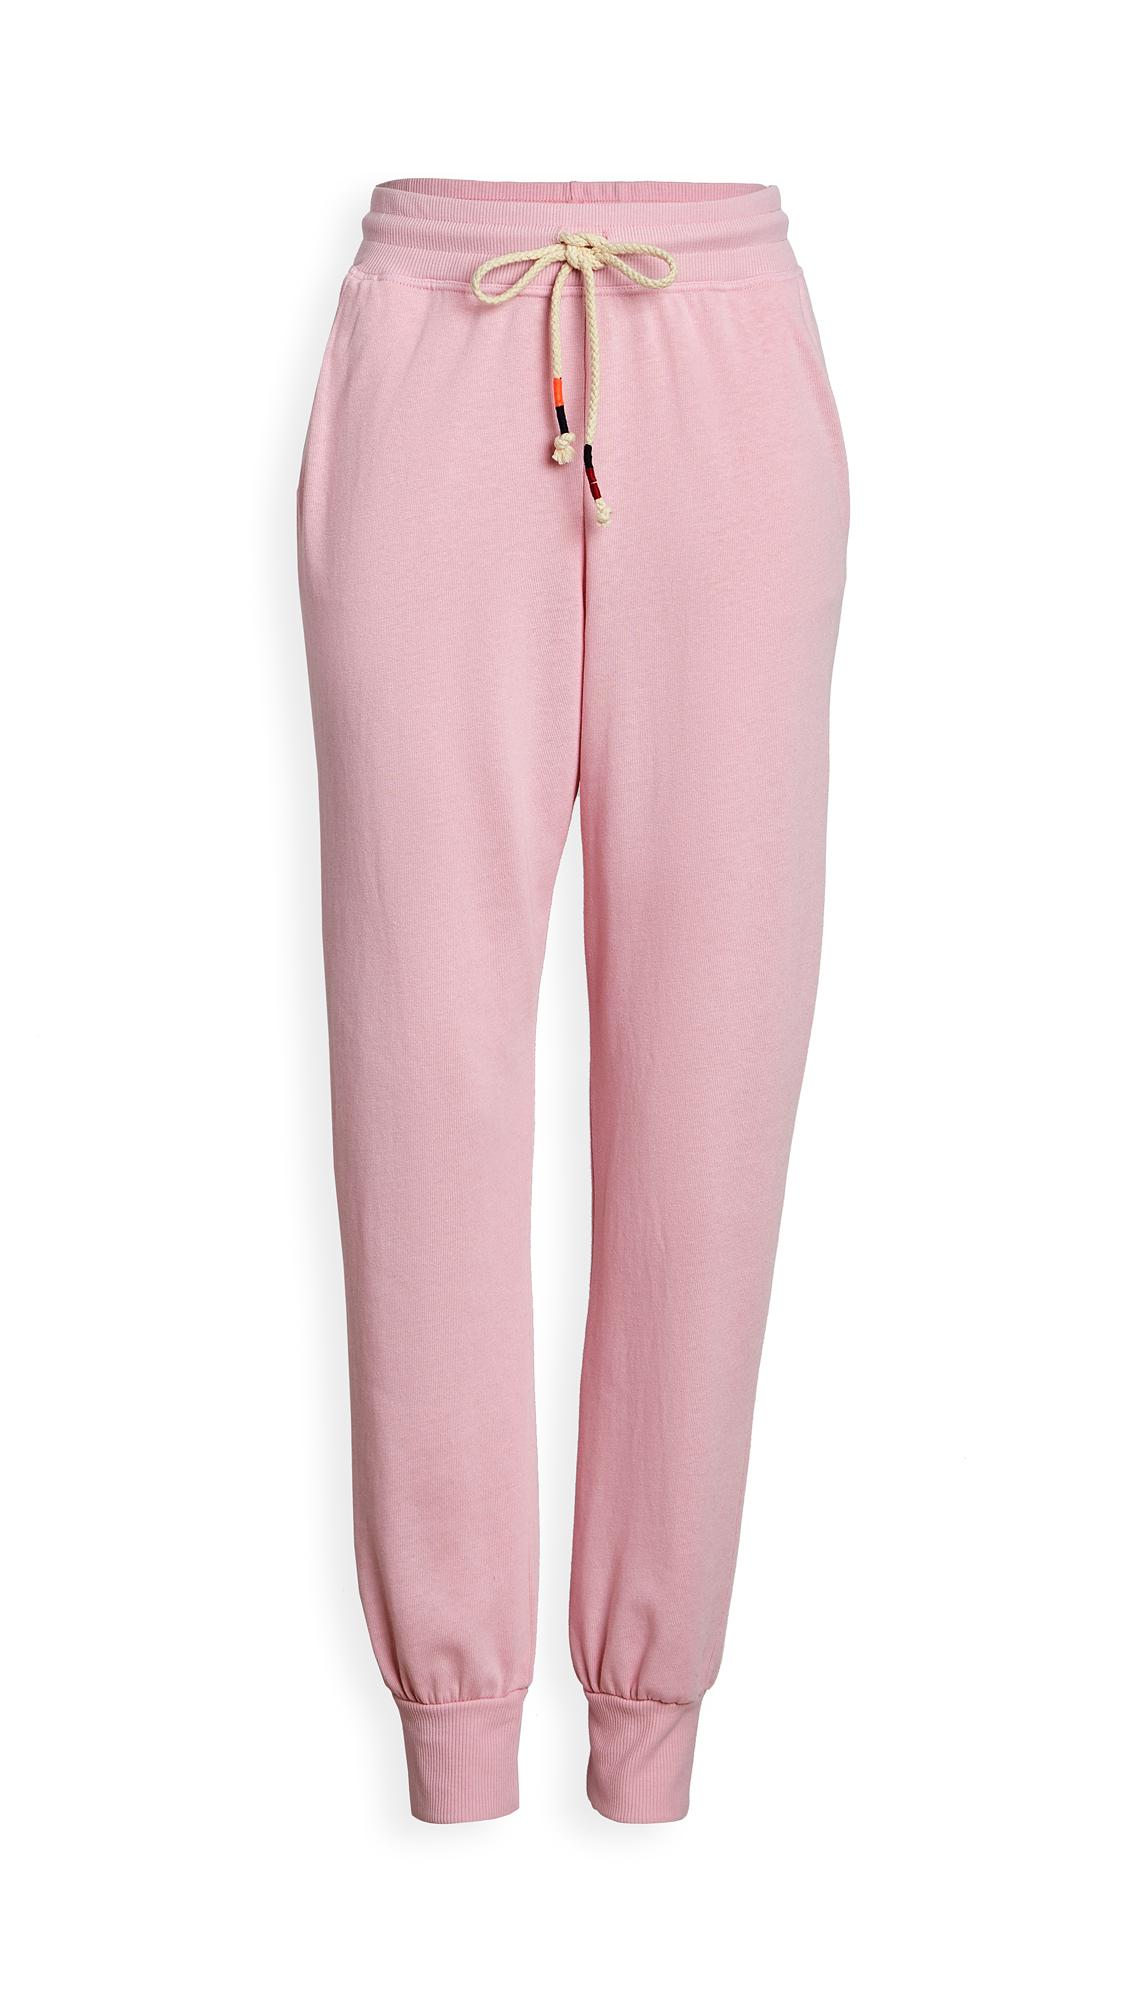 Sundry Synthetic Tapered Sweatpants in Flamingo (Pink) - Lyst